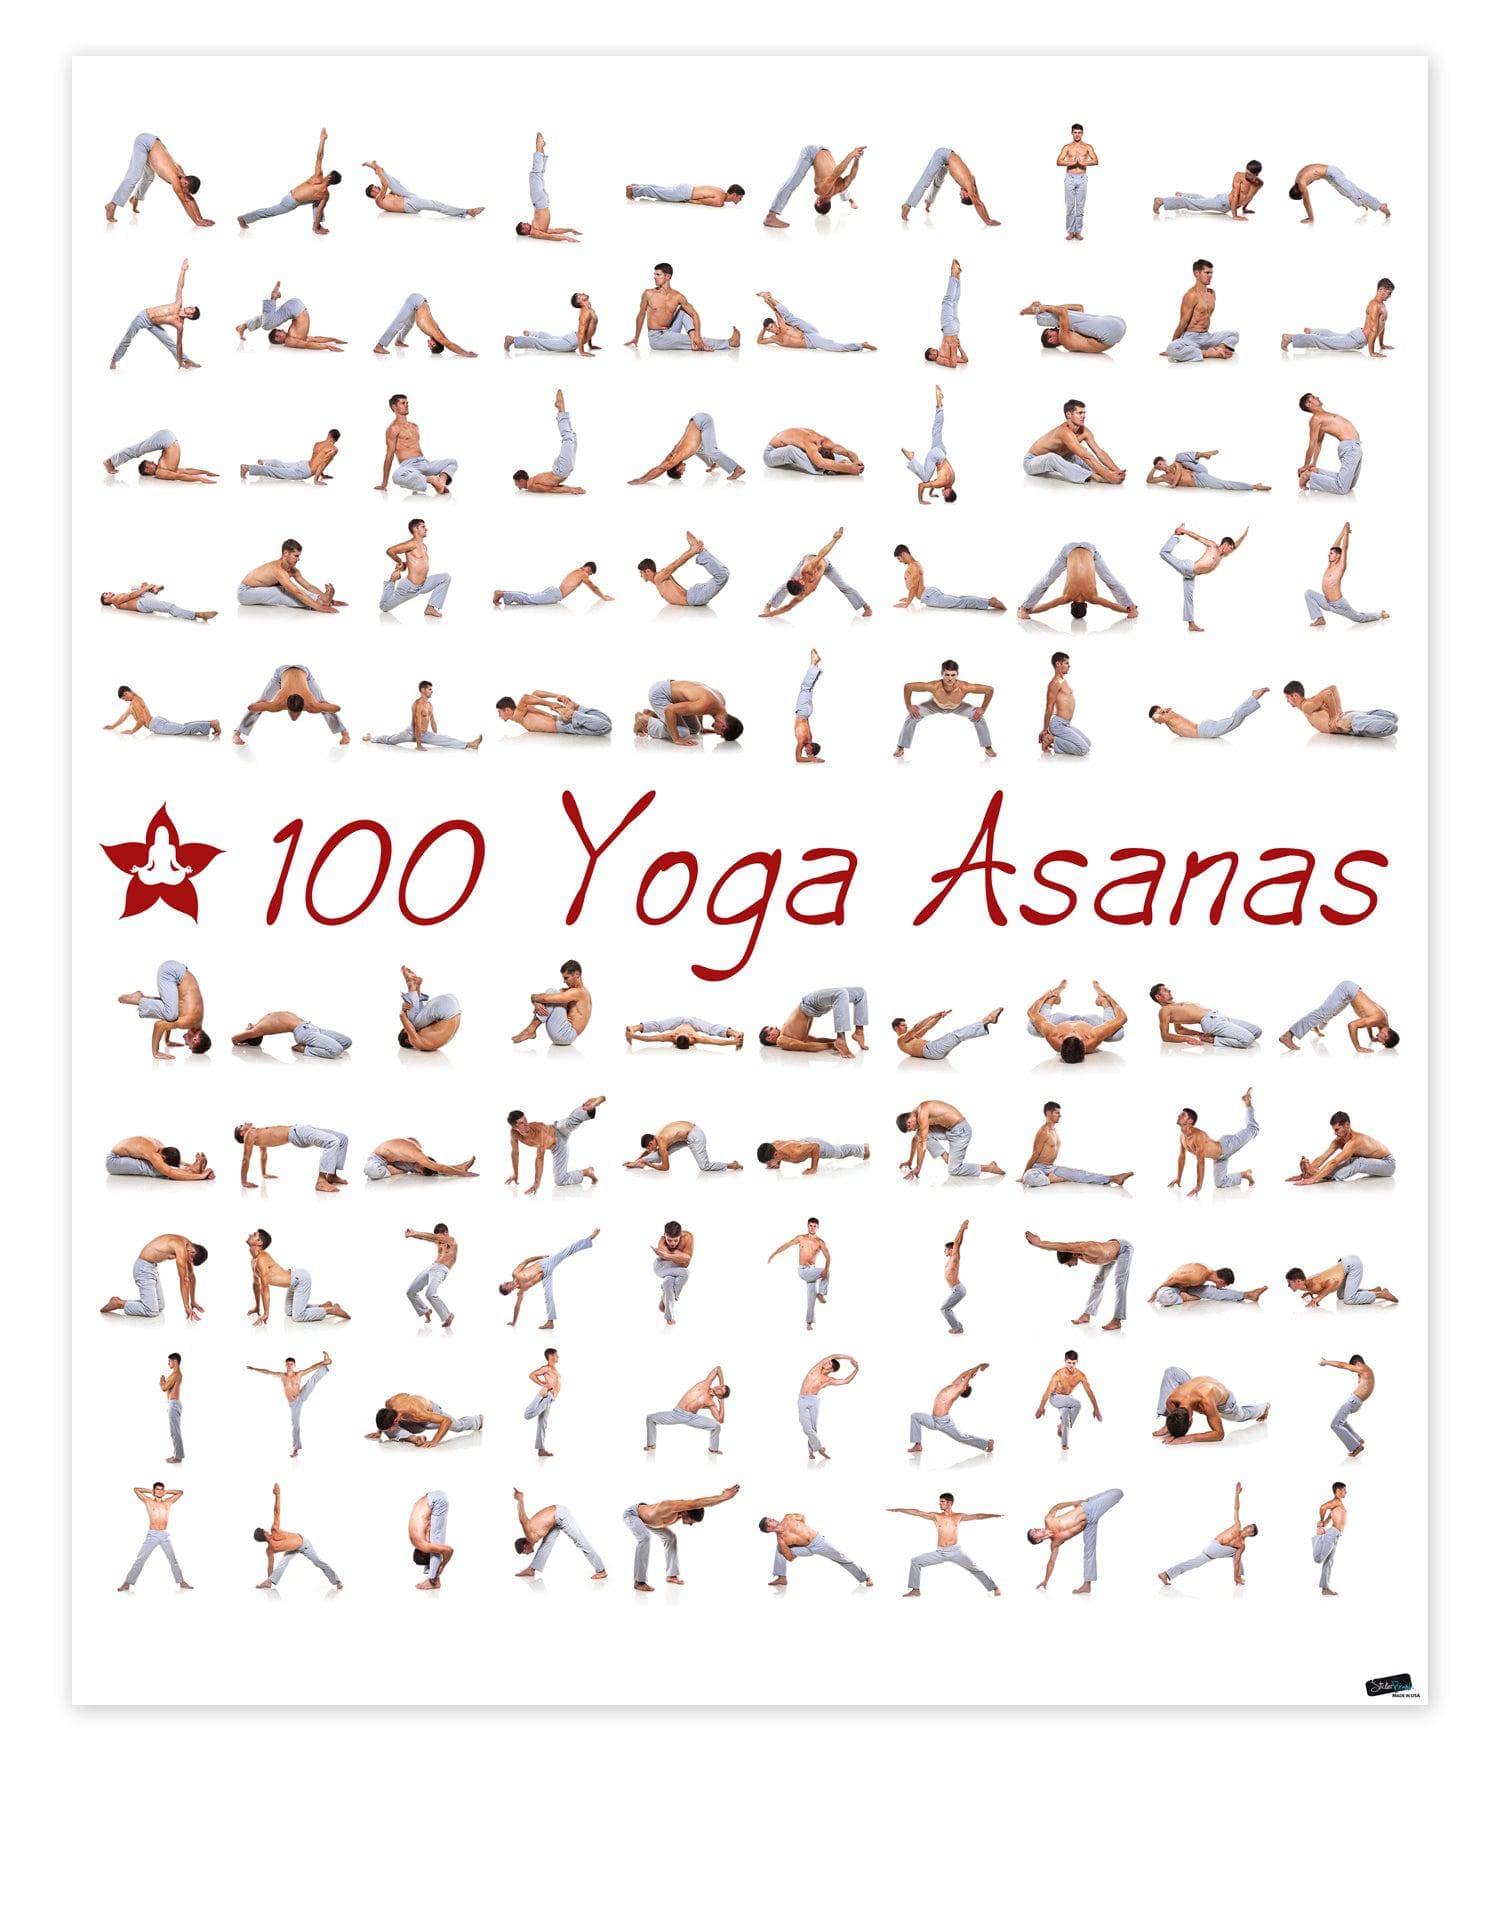 PAPER PLANE DESIGN Yoga poses Poster For Workout 12 x 18 inch : Amazon.in:  Home & Kitchen